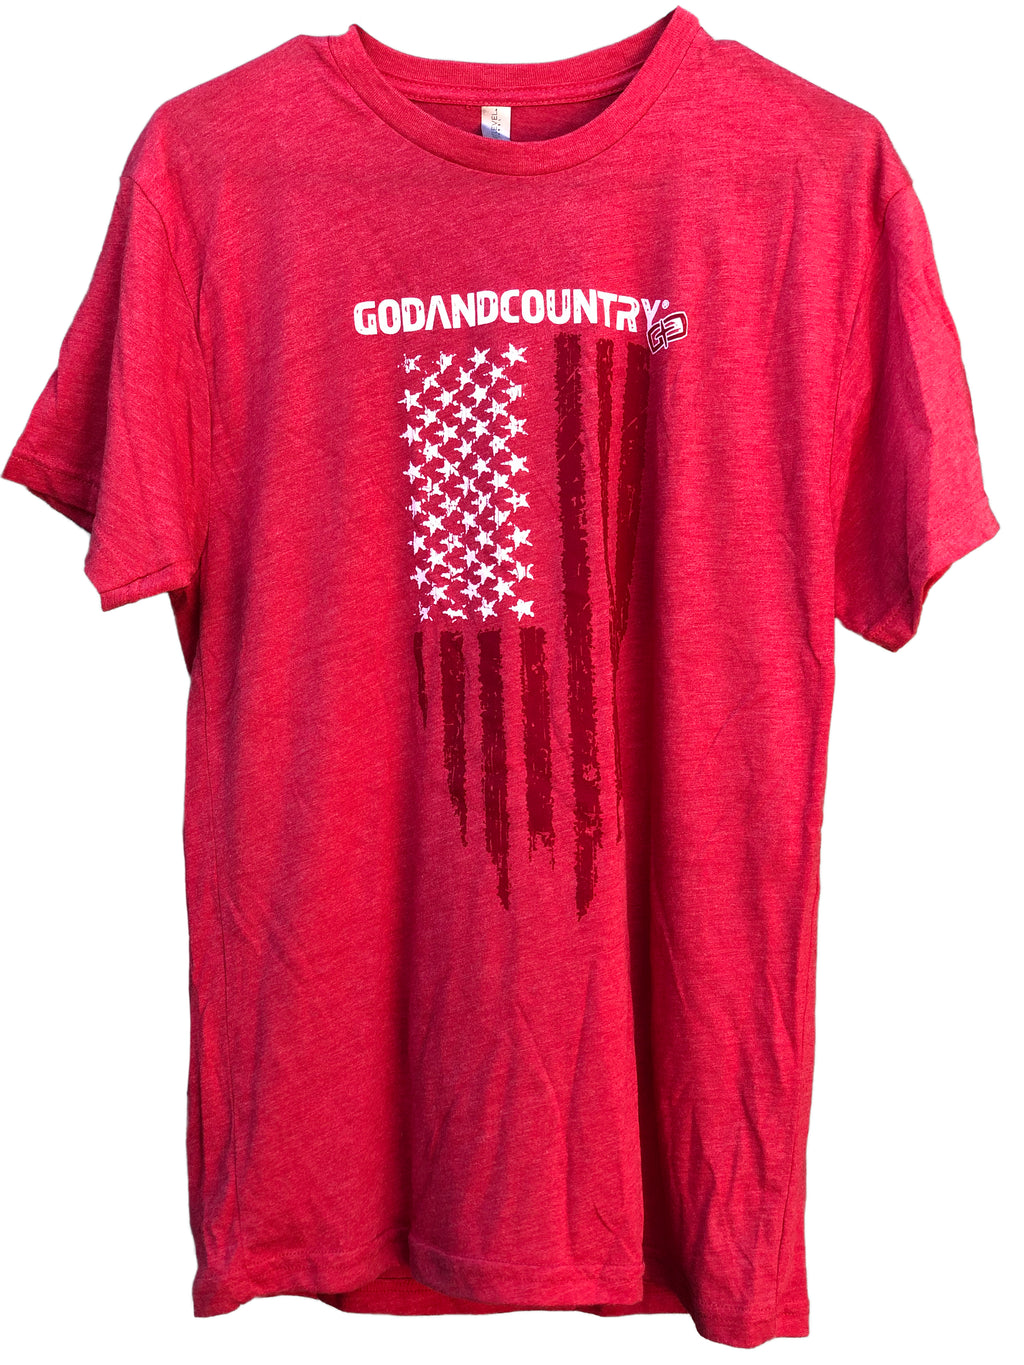 Crew Neck United As Intended Patriotic T-Shirt with Distressed American Flag [Vintage Red]